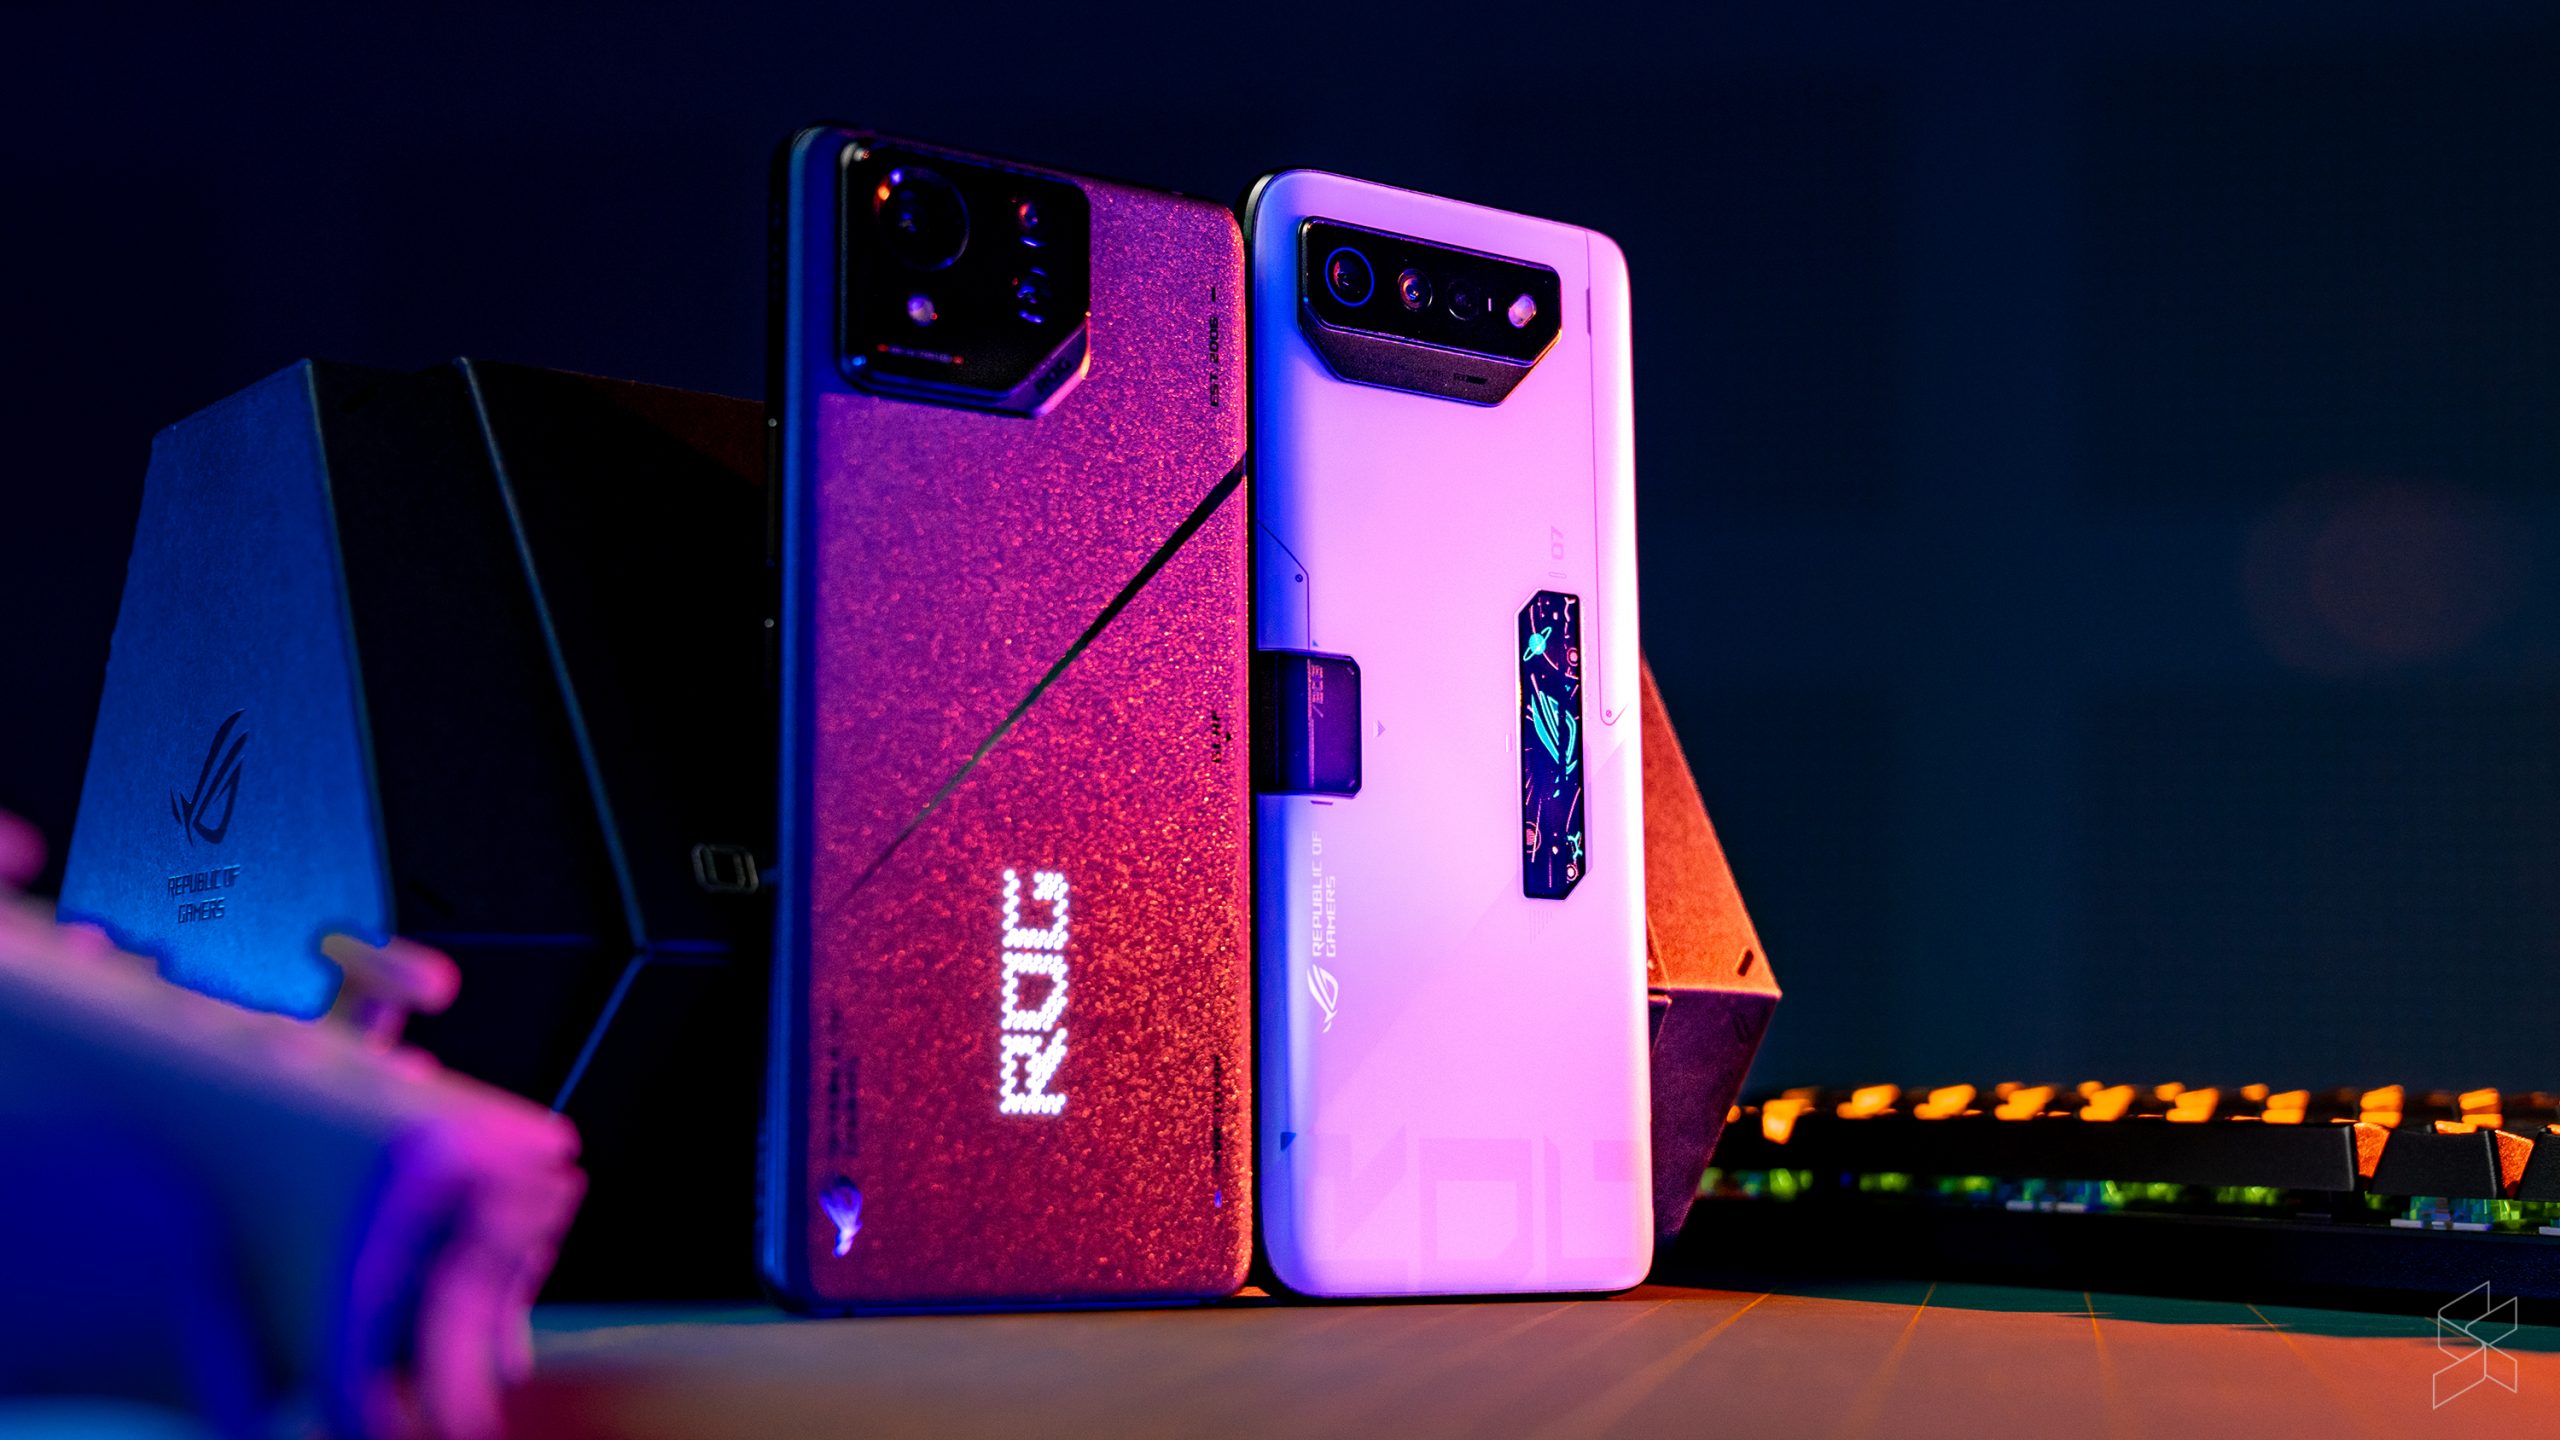 Phoneridar / Tech Influencer on Instagram: Asus Rog Phone 8 Pro Gaming  Smartphone officially Launched alongside with Asus Rog Phone 8. Follow  @phoneridar For More Amazing Latest Tech Updates. #asusrogphone8 #rogphone8  #rogphone8pro #asusrogphone8pro